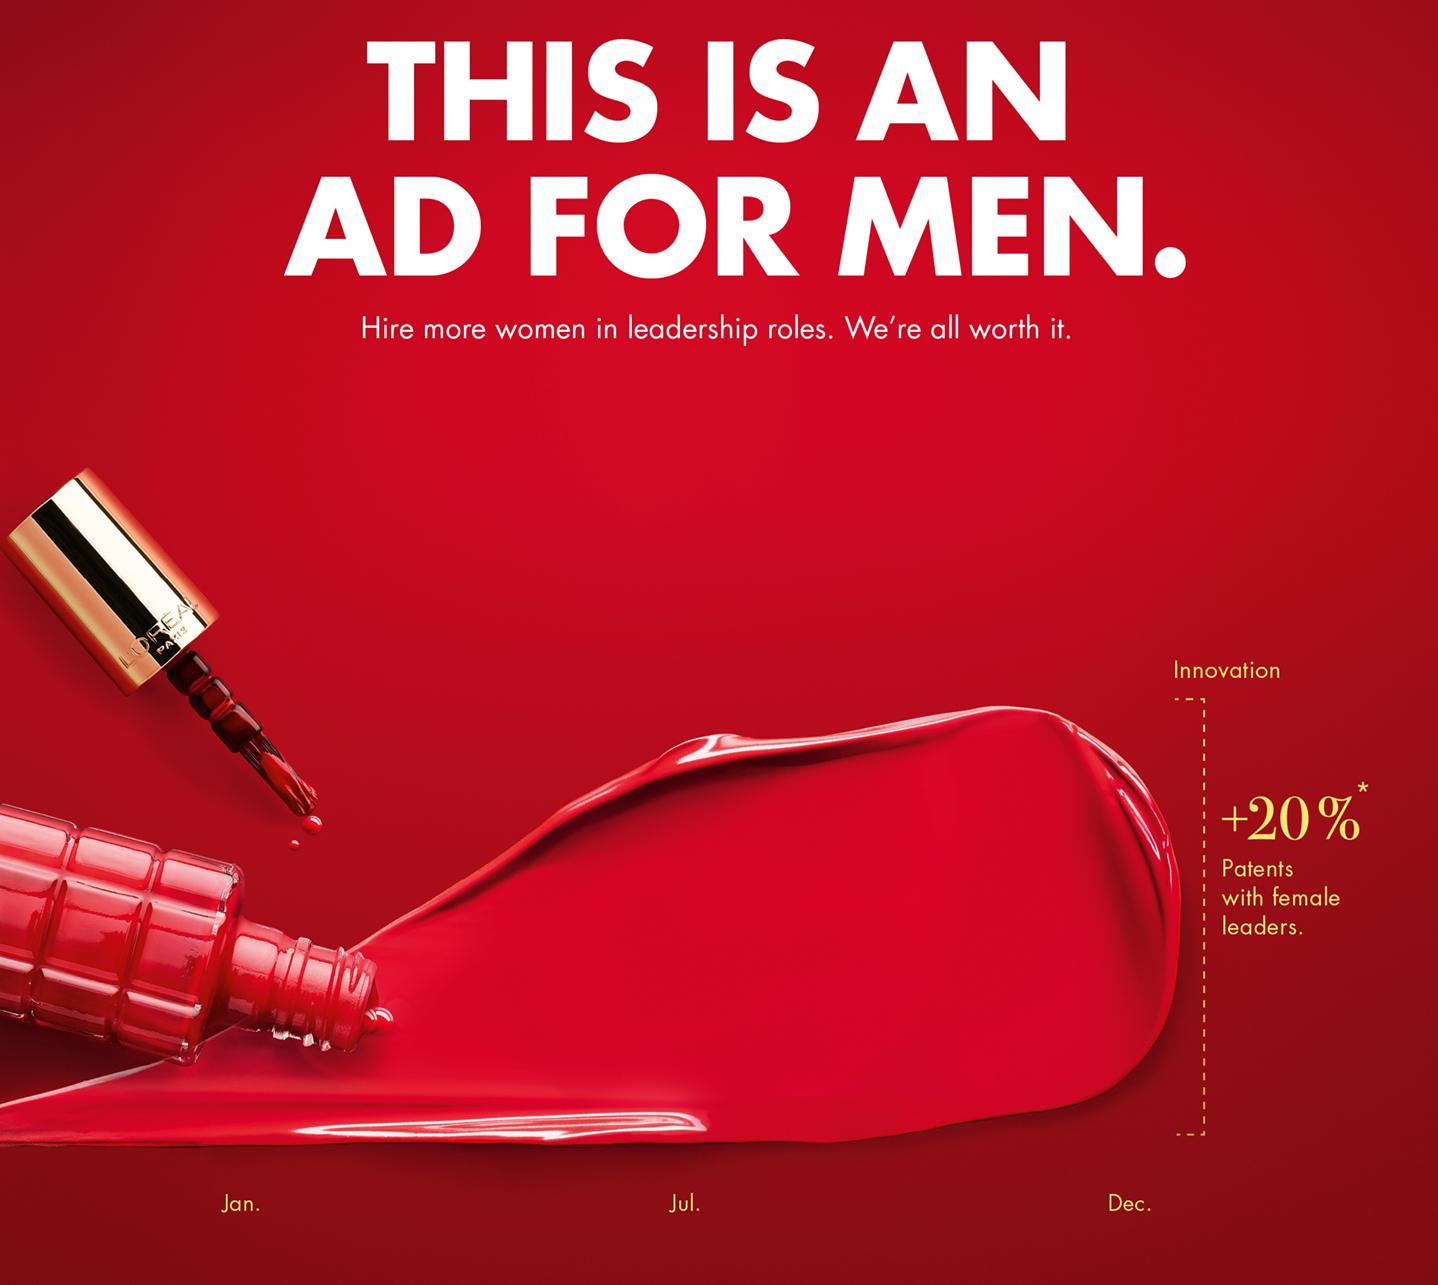 L’Oreal recently launched a series of advertisements that showcase its cosmetics as a way to emphasize the importance of gender diversity within companies' management ranks.